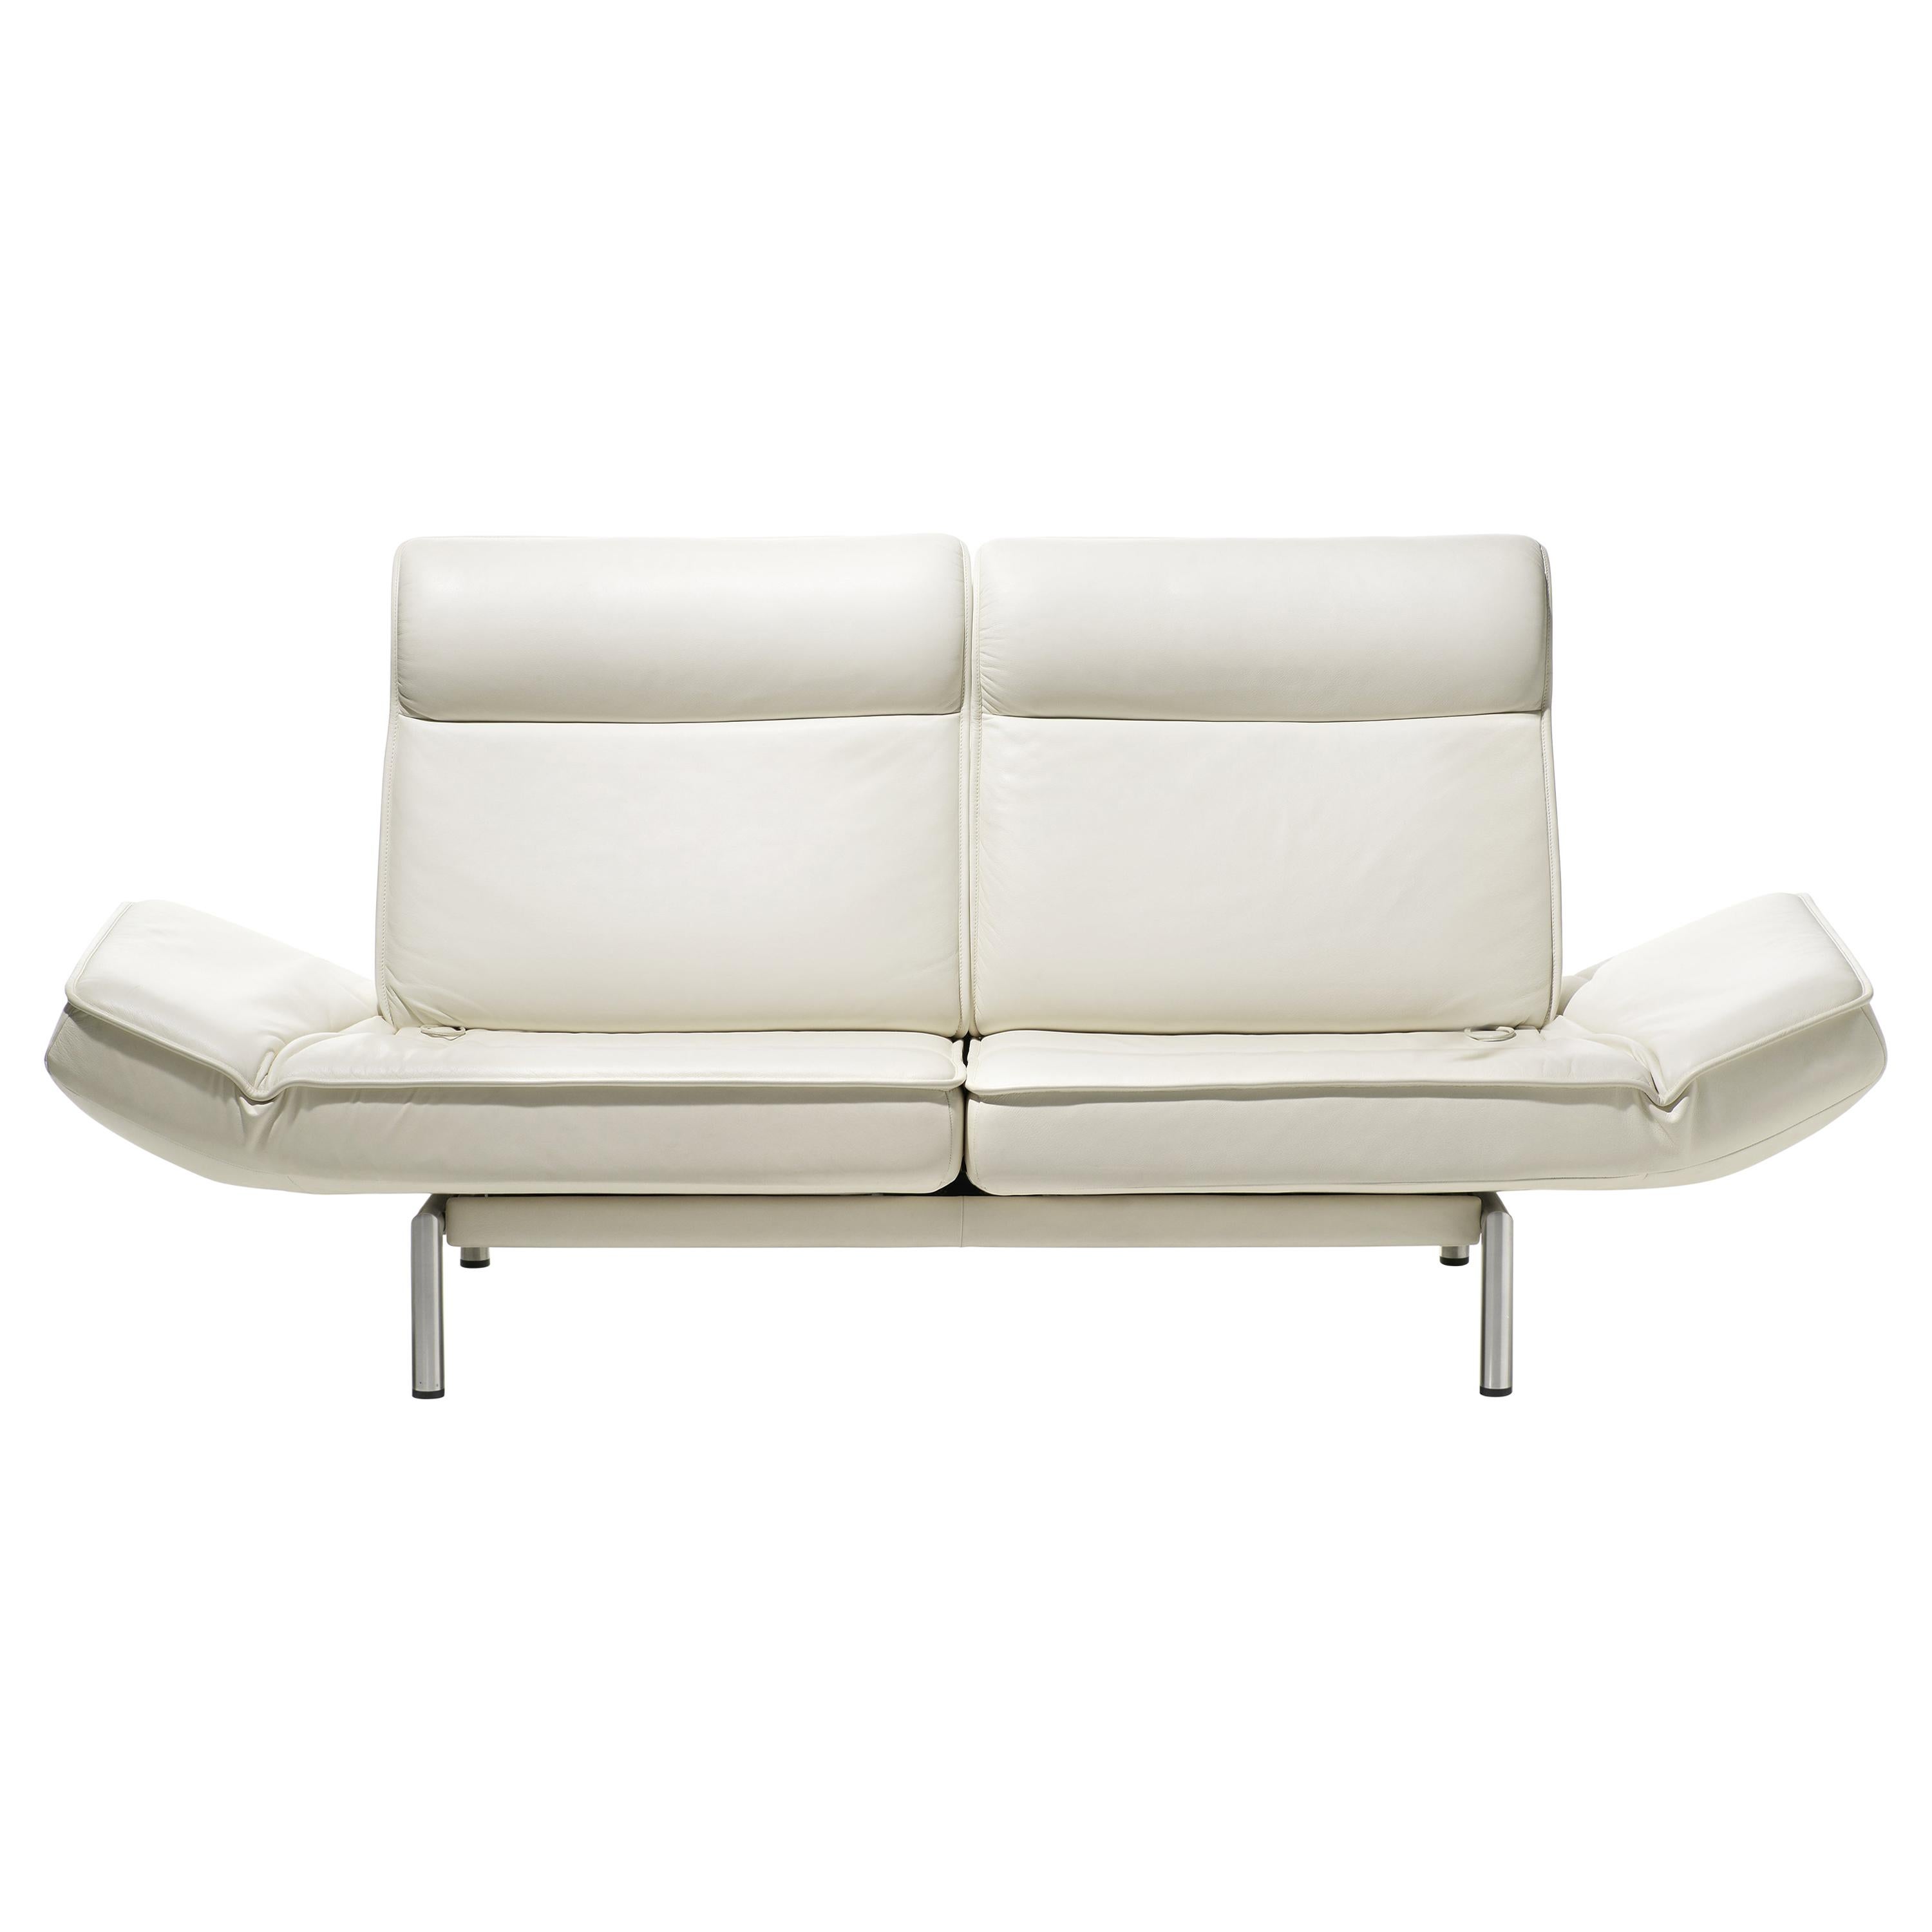 For Sale: White (Snow) DS-450 Adjustable Leather Modern Sofa or Armchair by De Sede